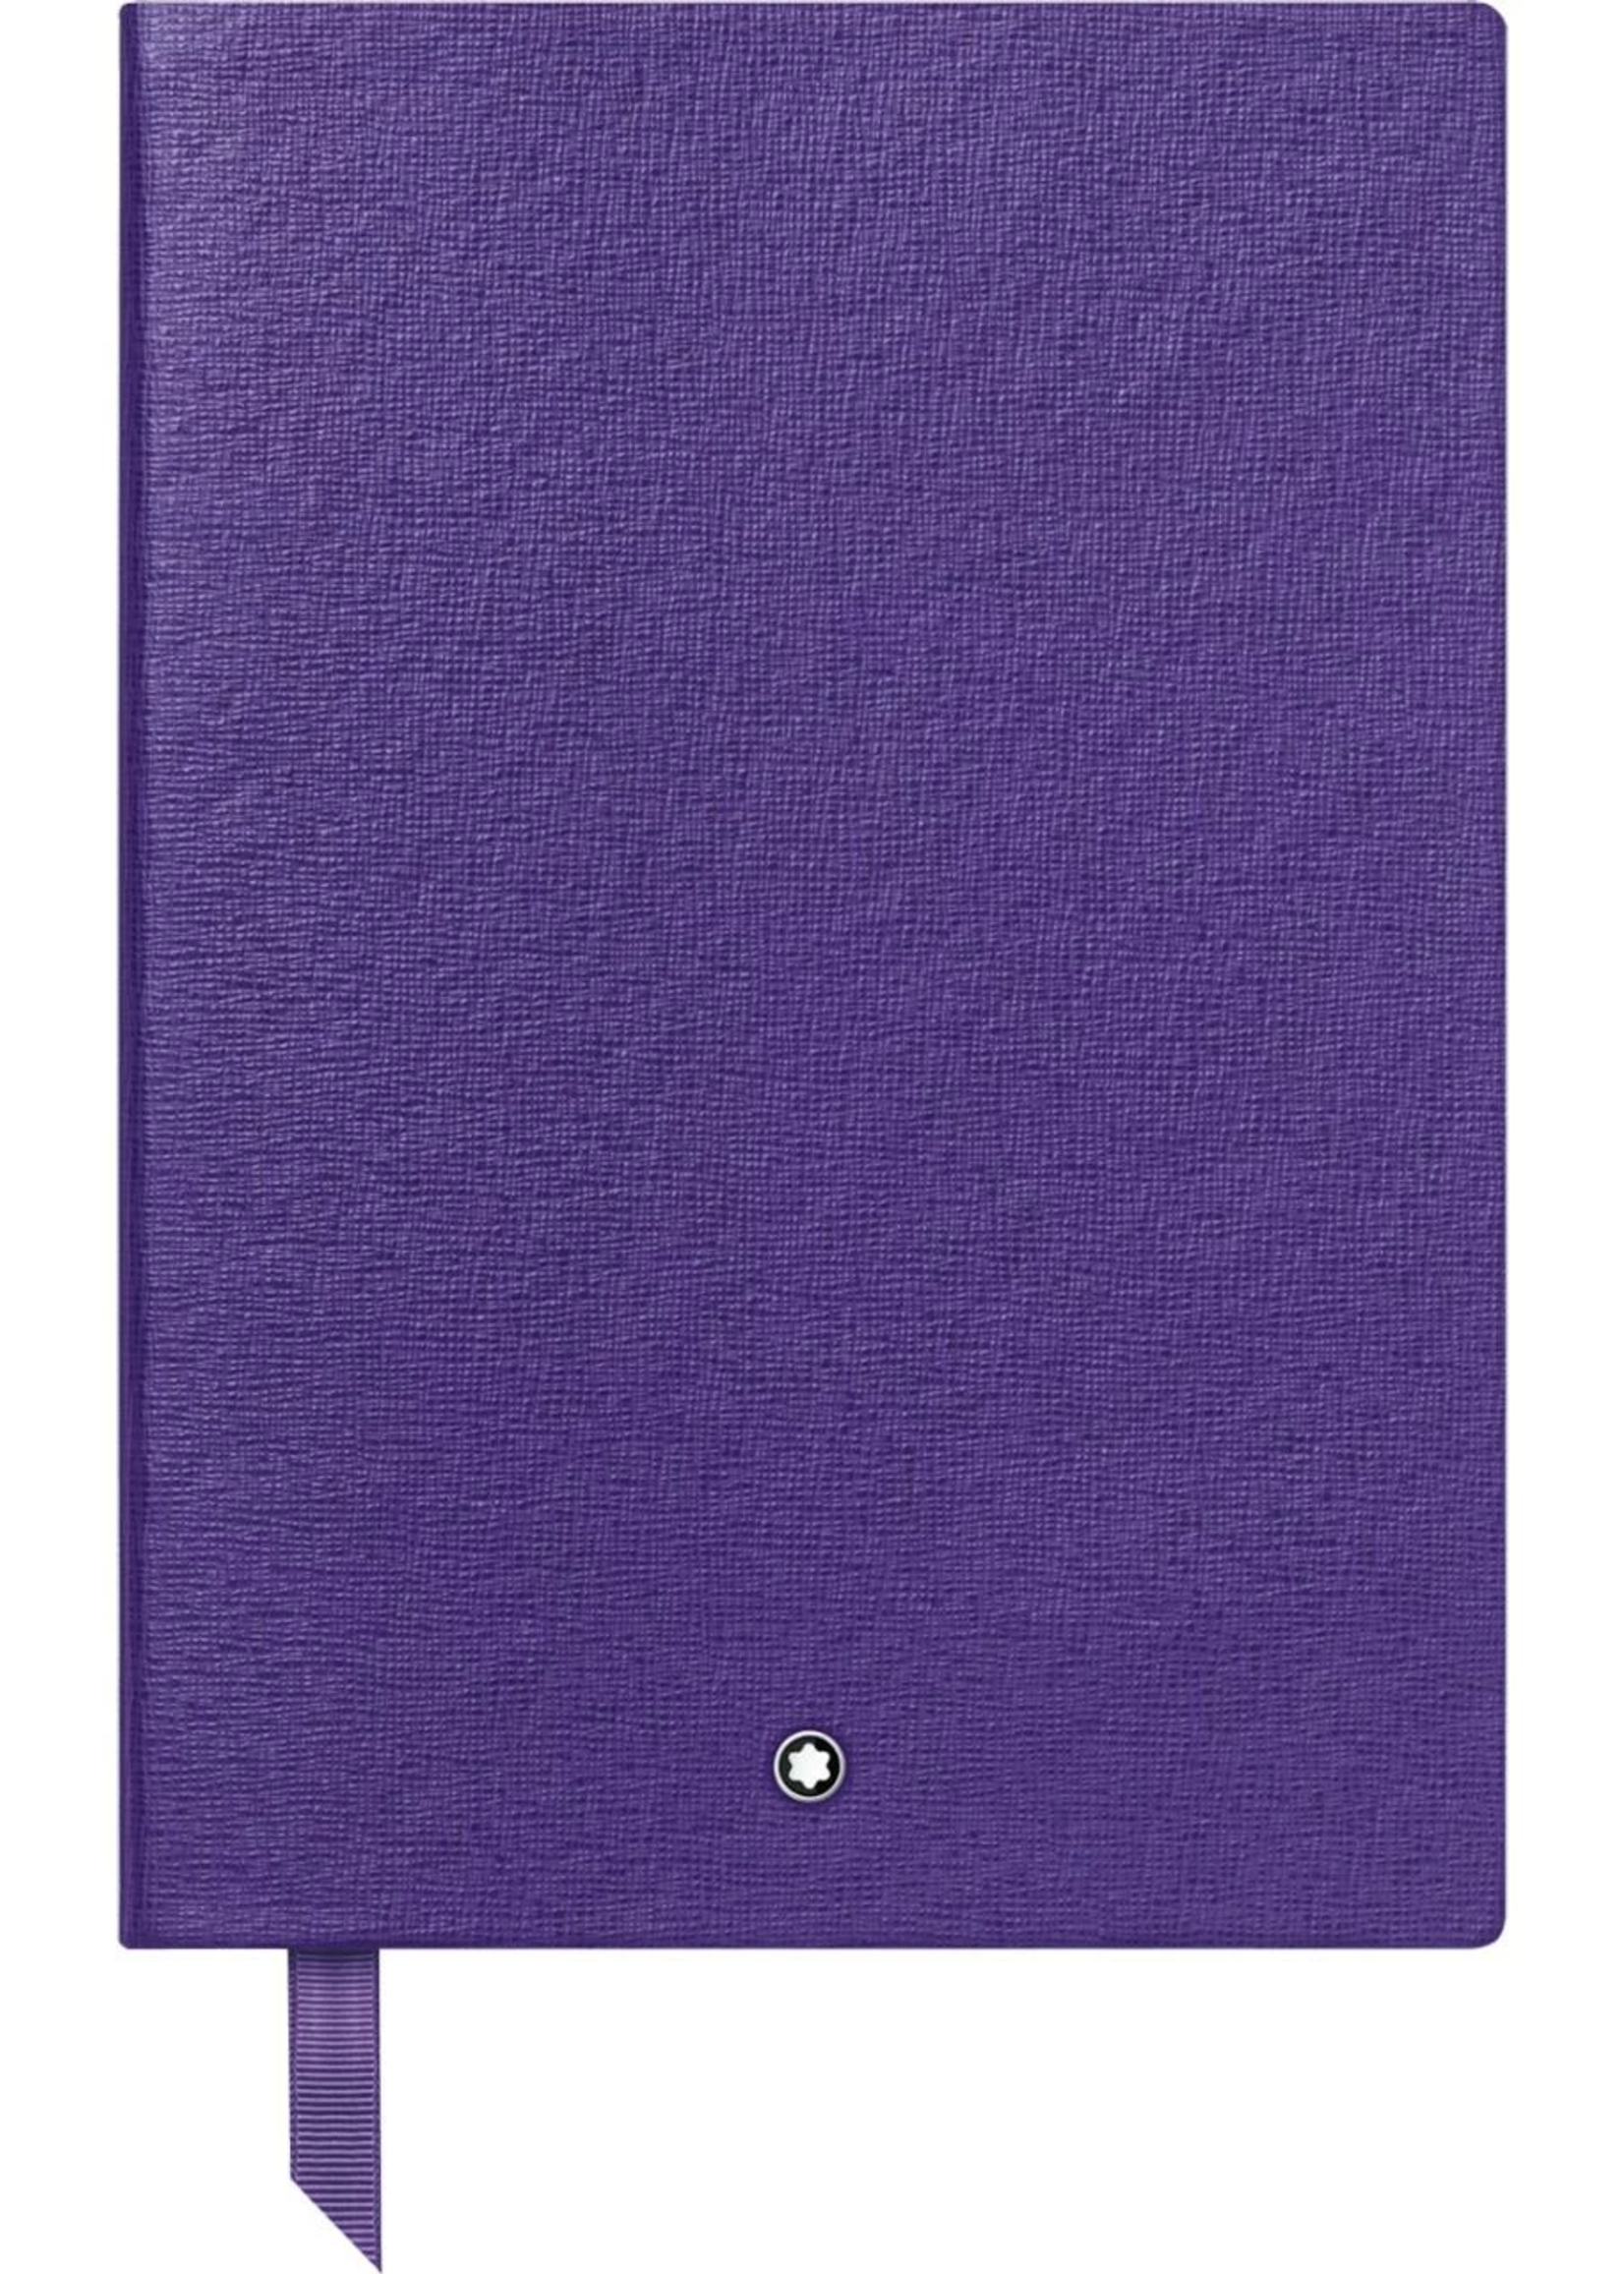 Montblanc STA NOTEBOOK #146, Purple, lined